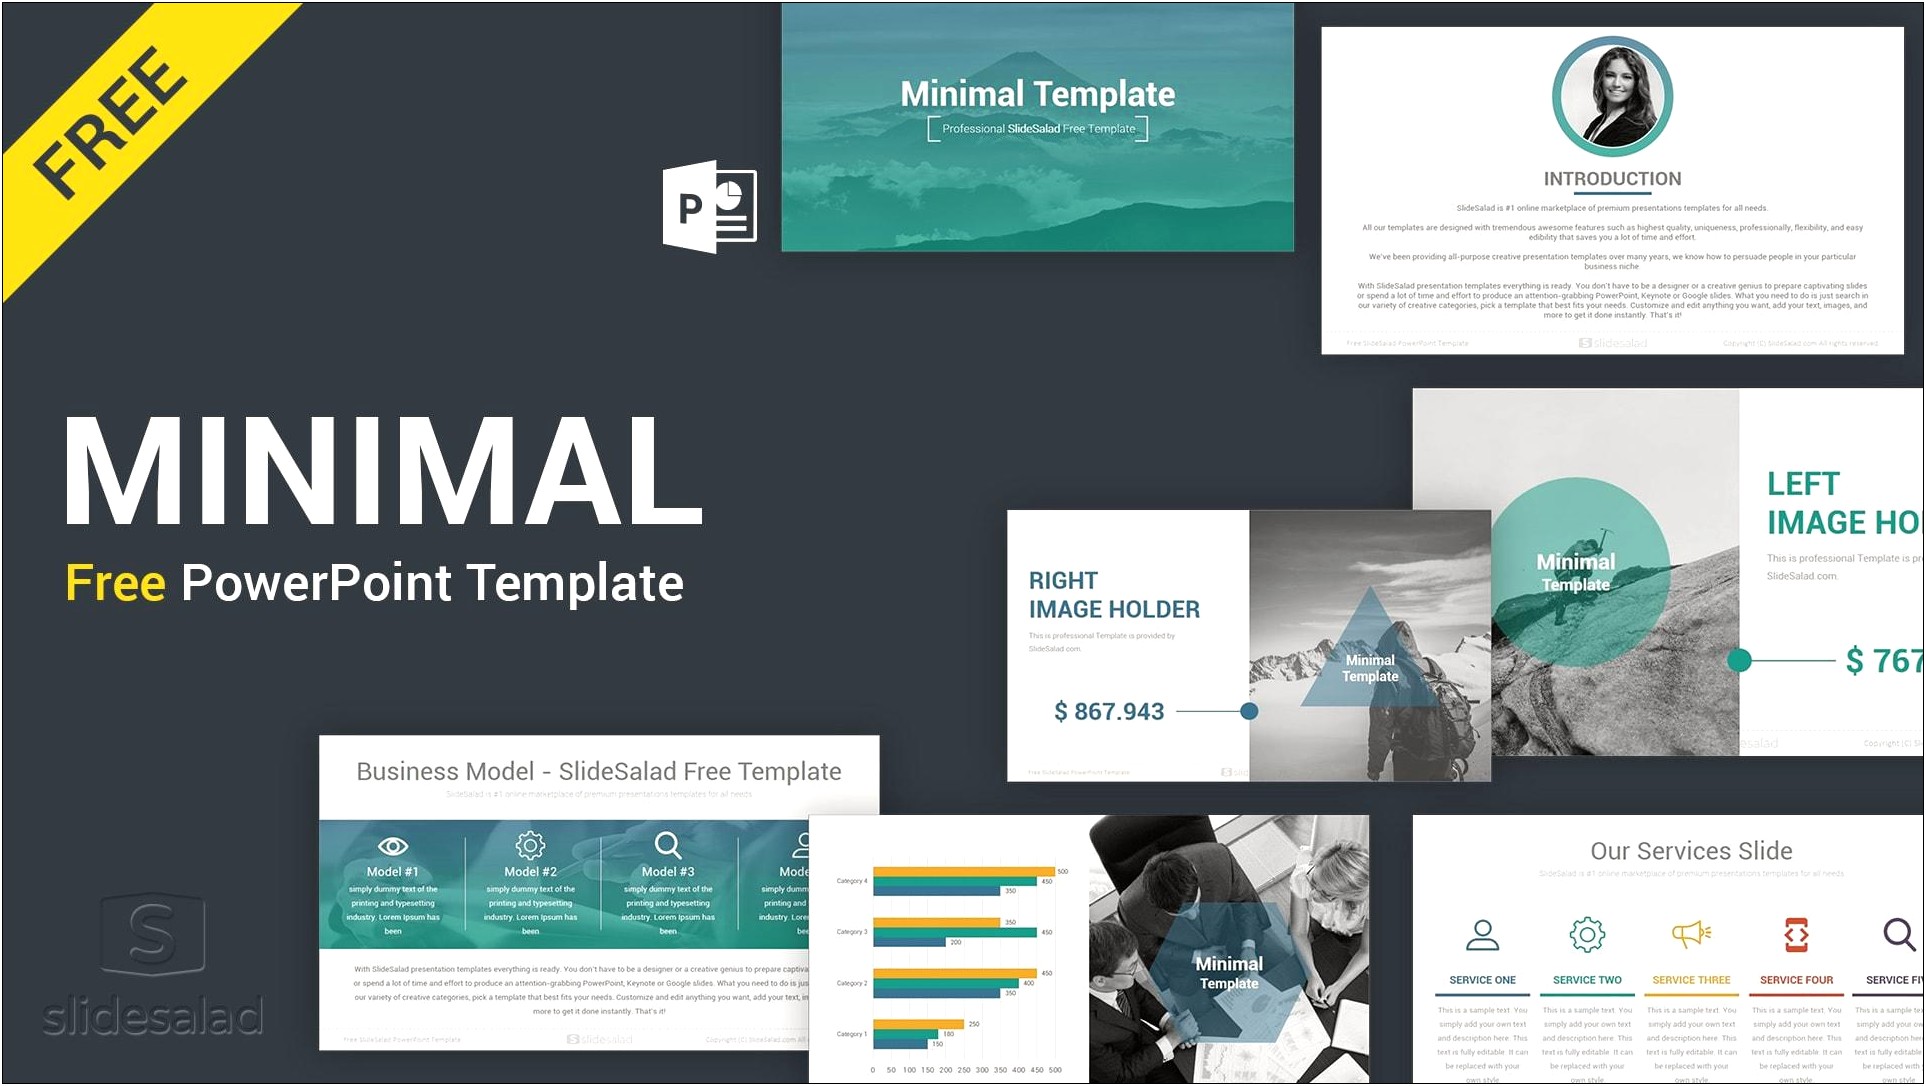 Free Powerpoint Presentation Templates And Themes